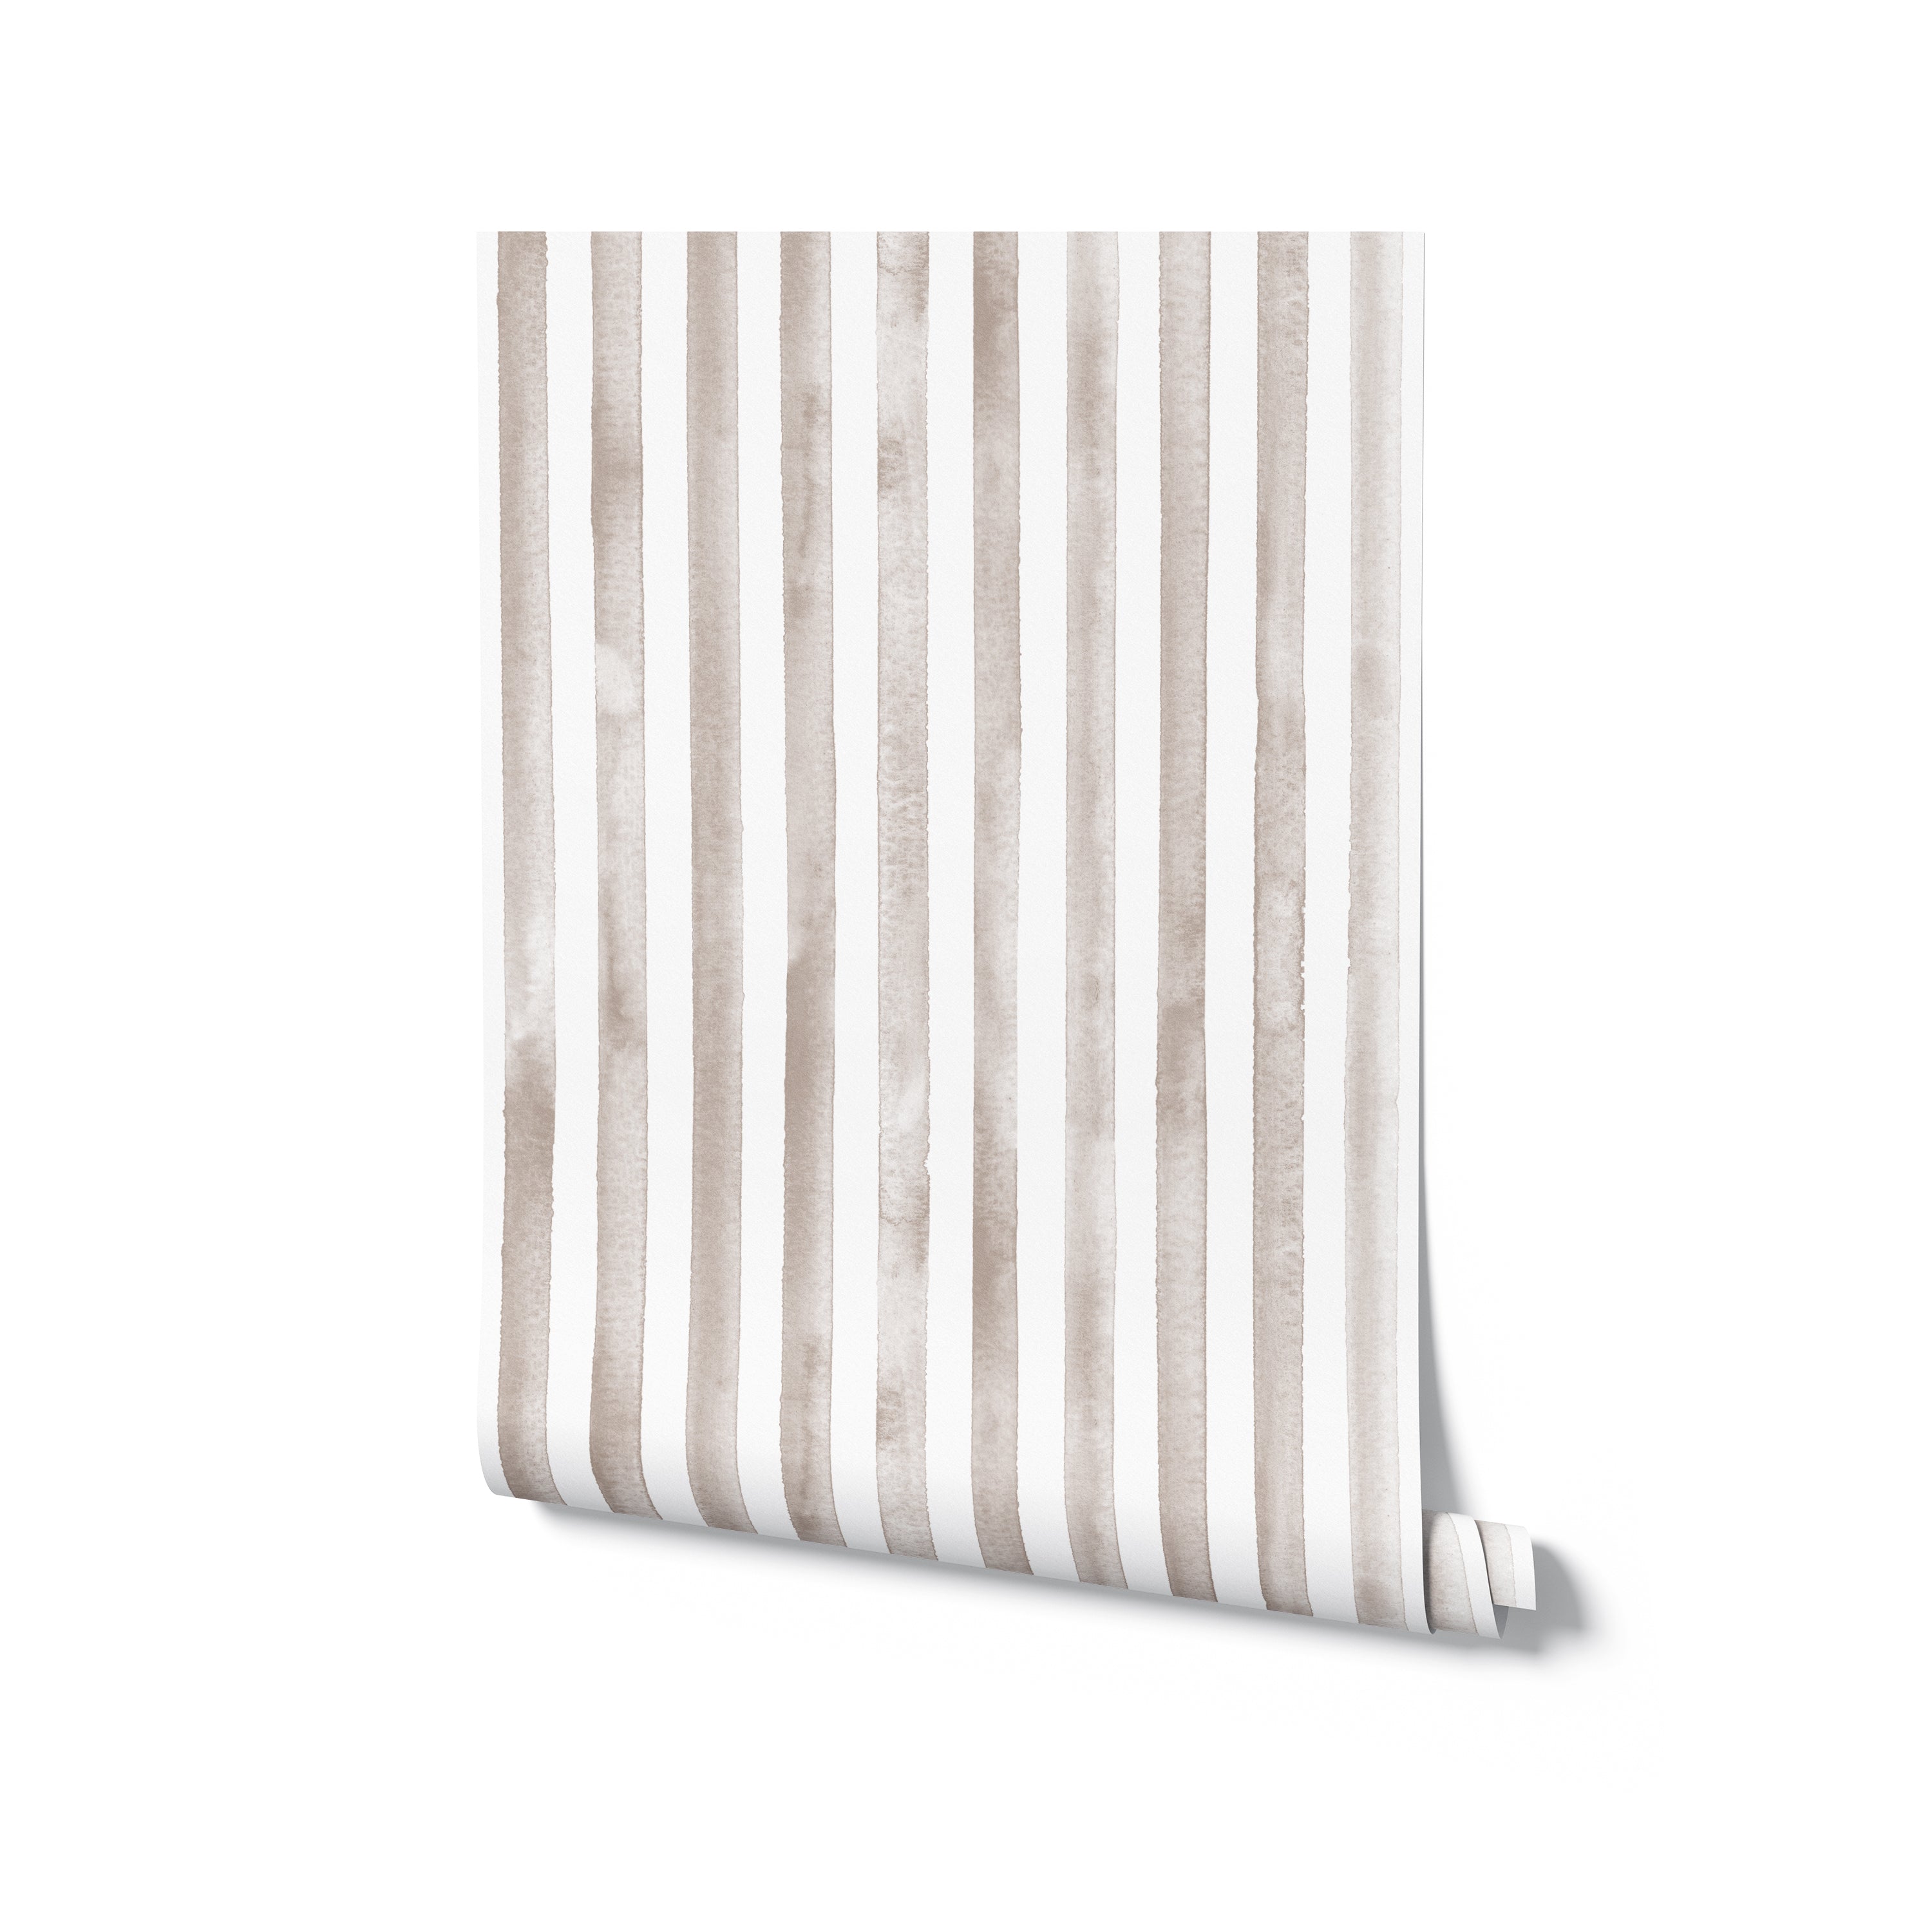 Roll of beige watercolour stripes wallpaper showcasing a seamless pattern of vertical, gradient-like stripes. The subtle color transition offers a versatile option for various room styles, from living spaces to personal studies.